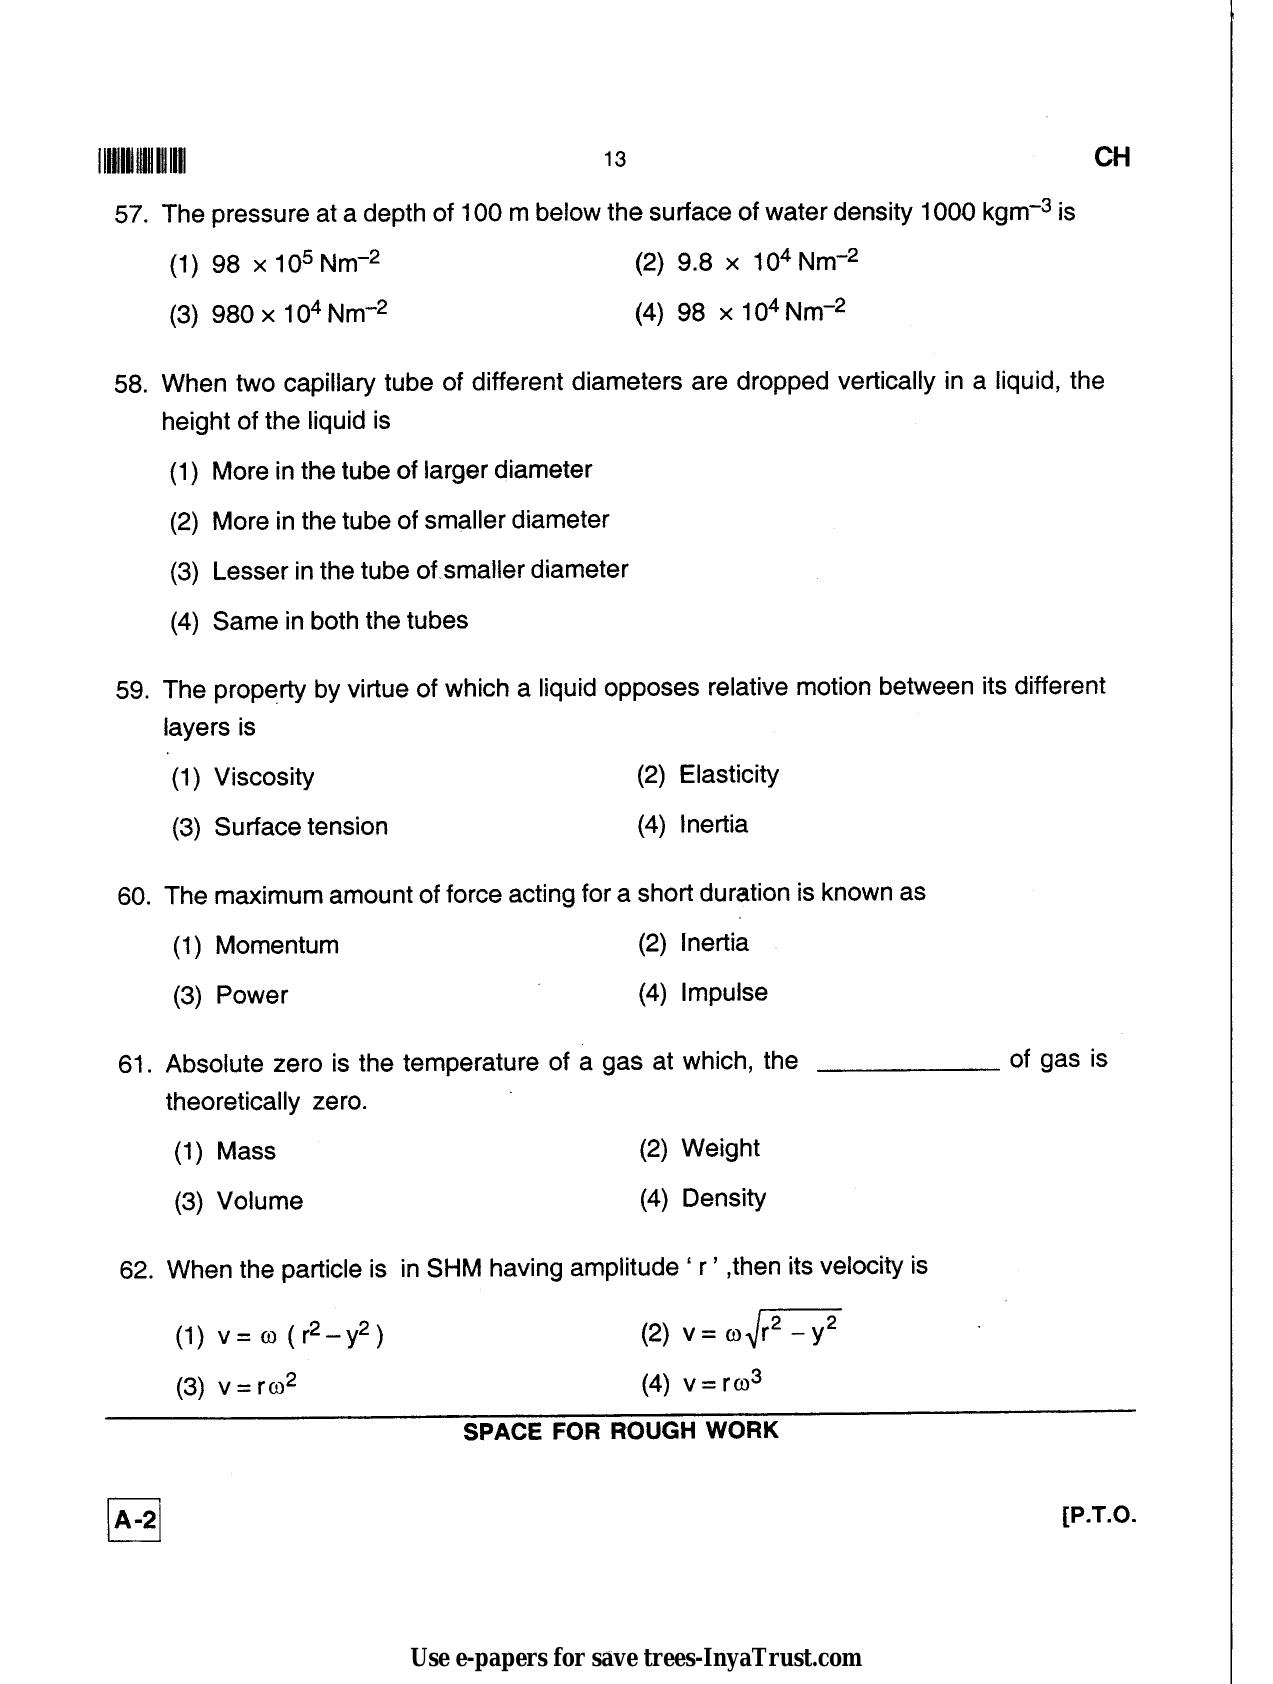 Karnataka Diploma CET- 2013 Chemical Engineering / Polymer Technology Question Paper - Page 13